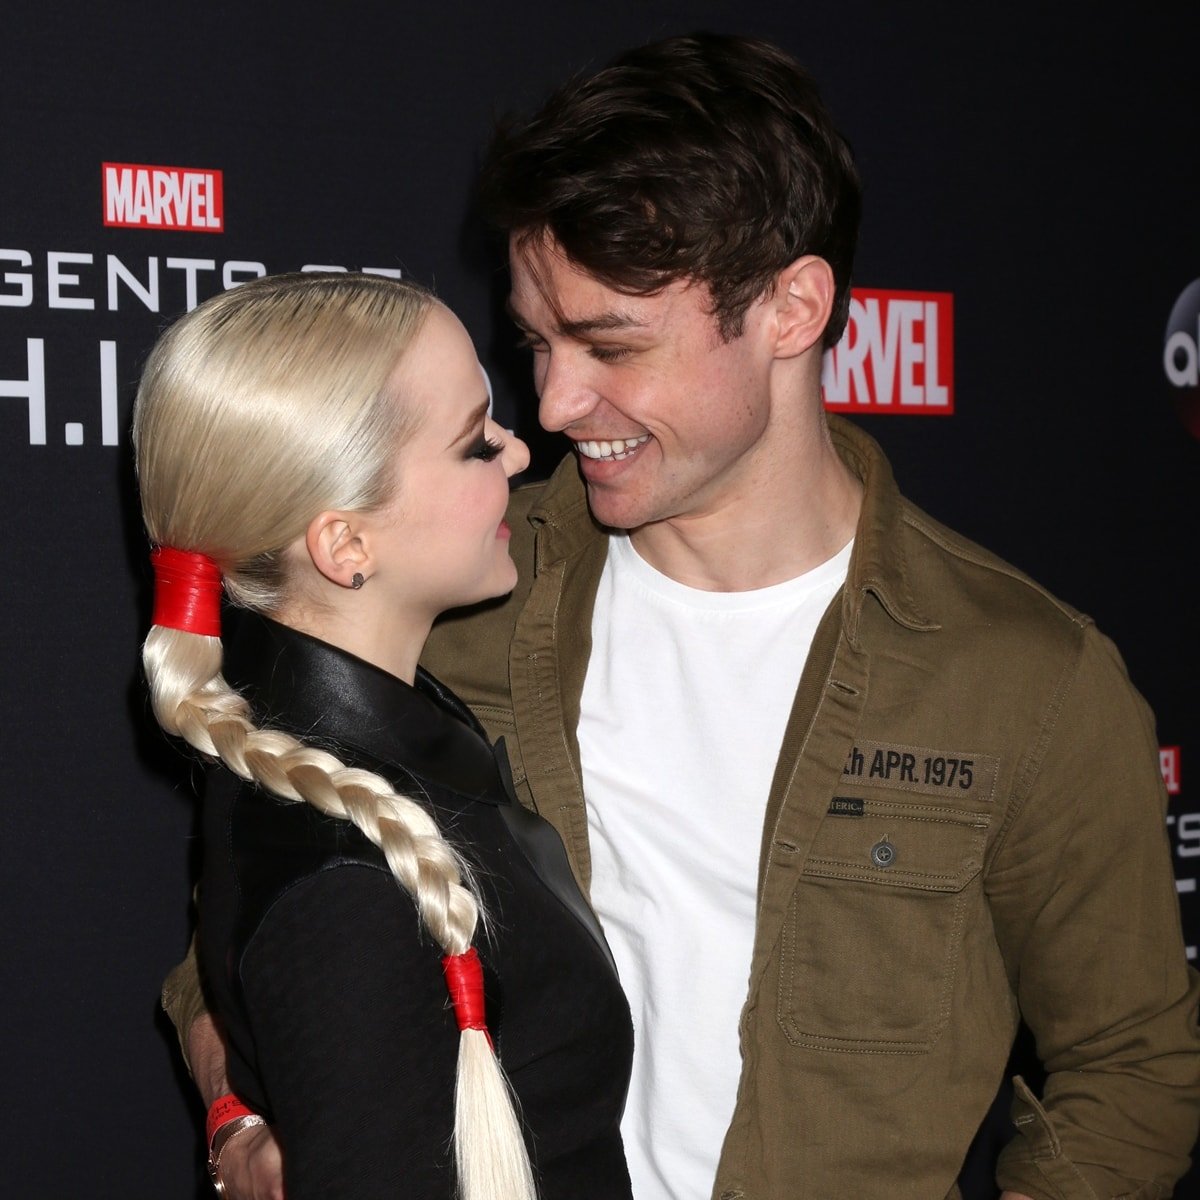 Dove Cameron and Thomas Doherty split in December 2020 after dating for four years